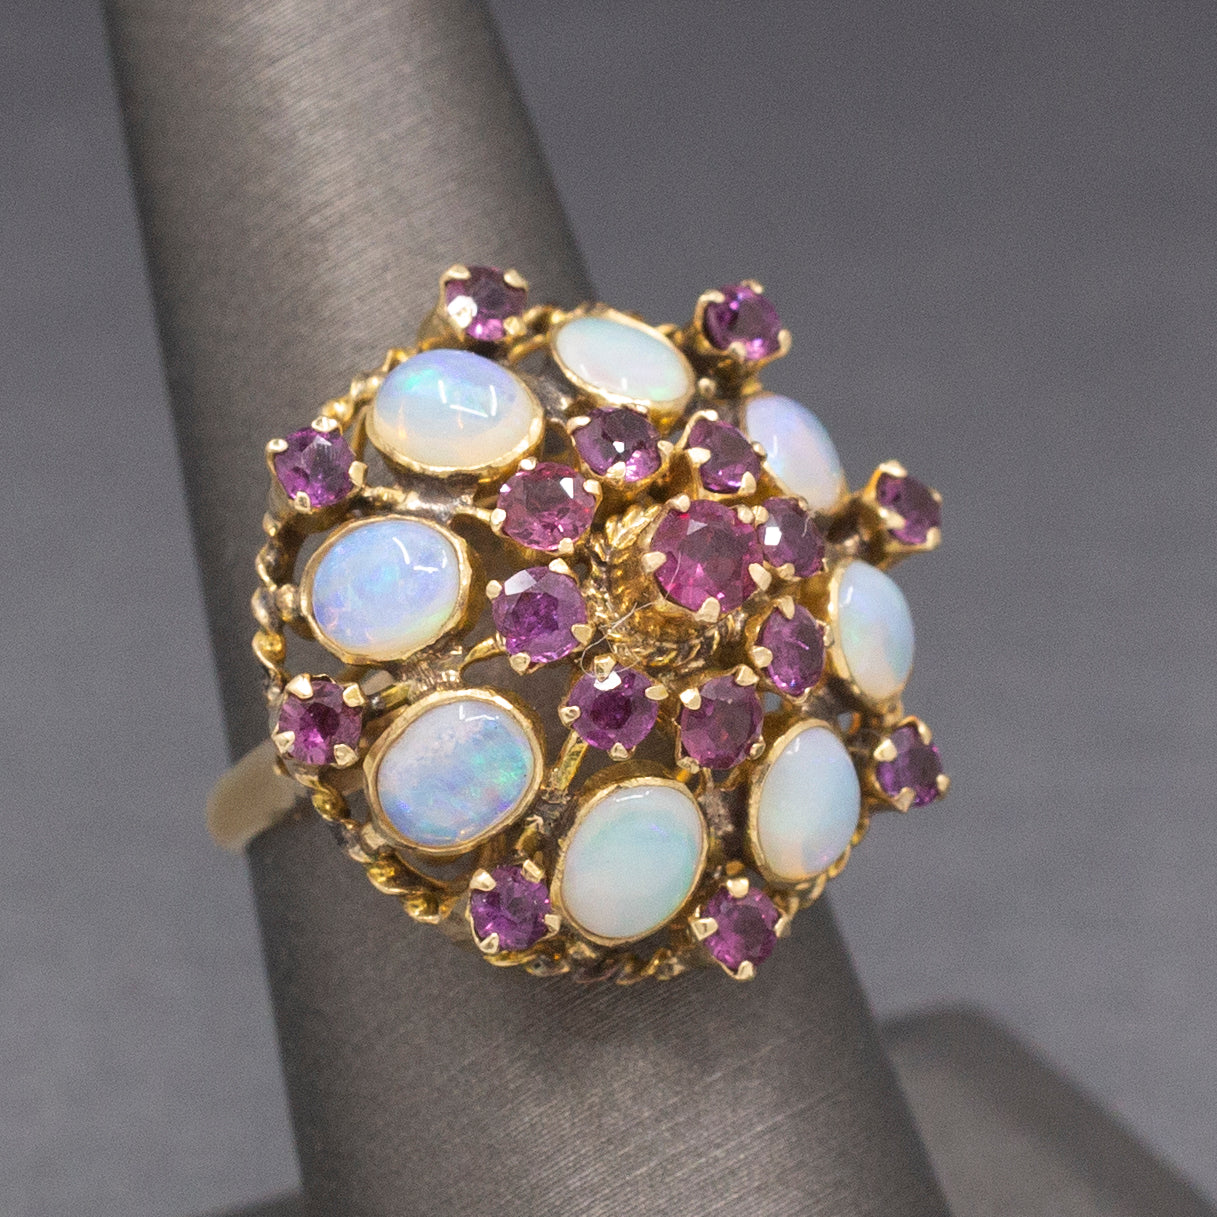 Fantastic Ruby and Opal Harem Princess Cake Ring in 12k Yellow Gold